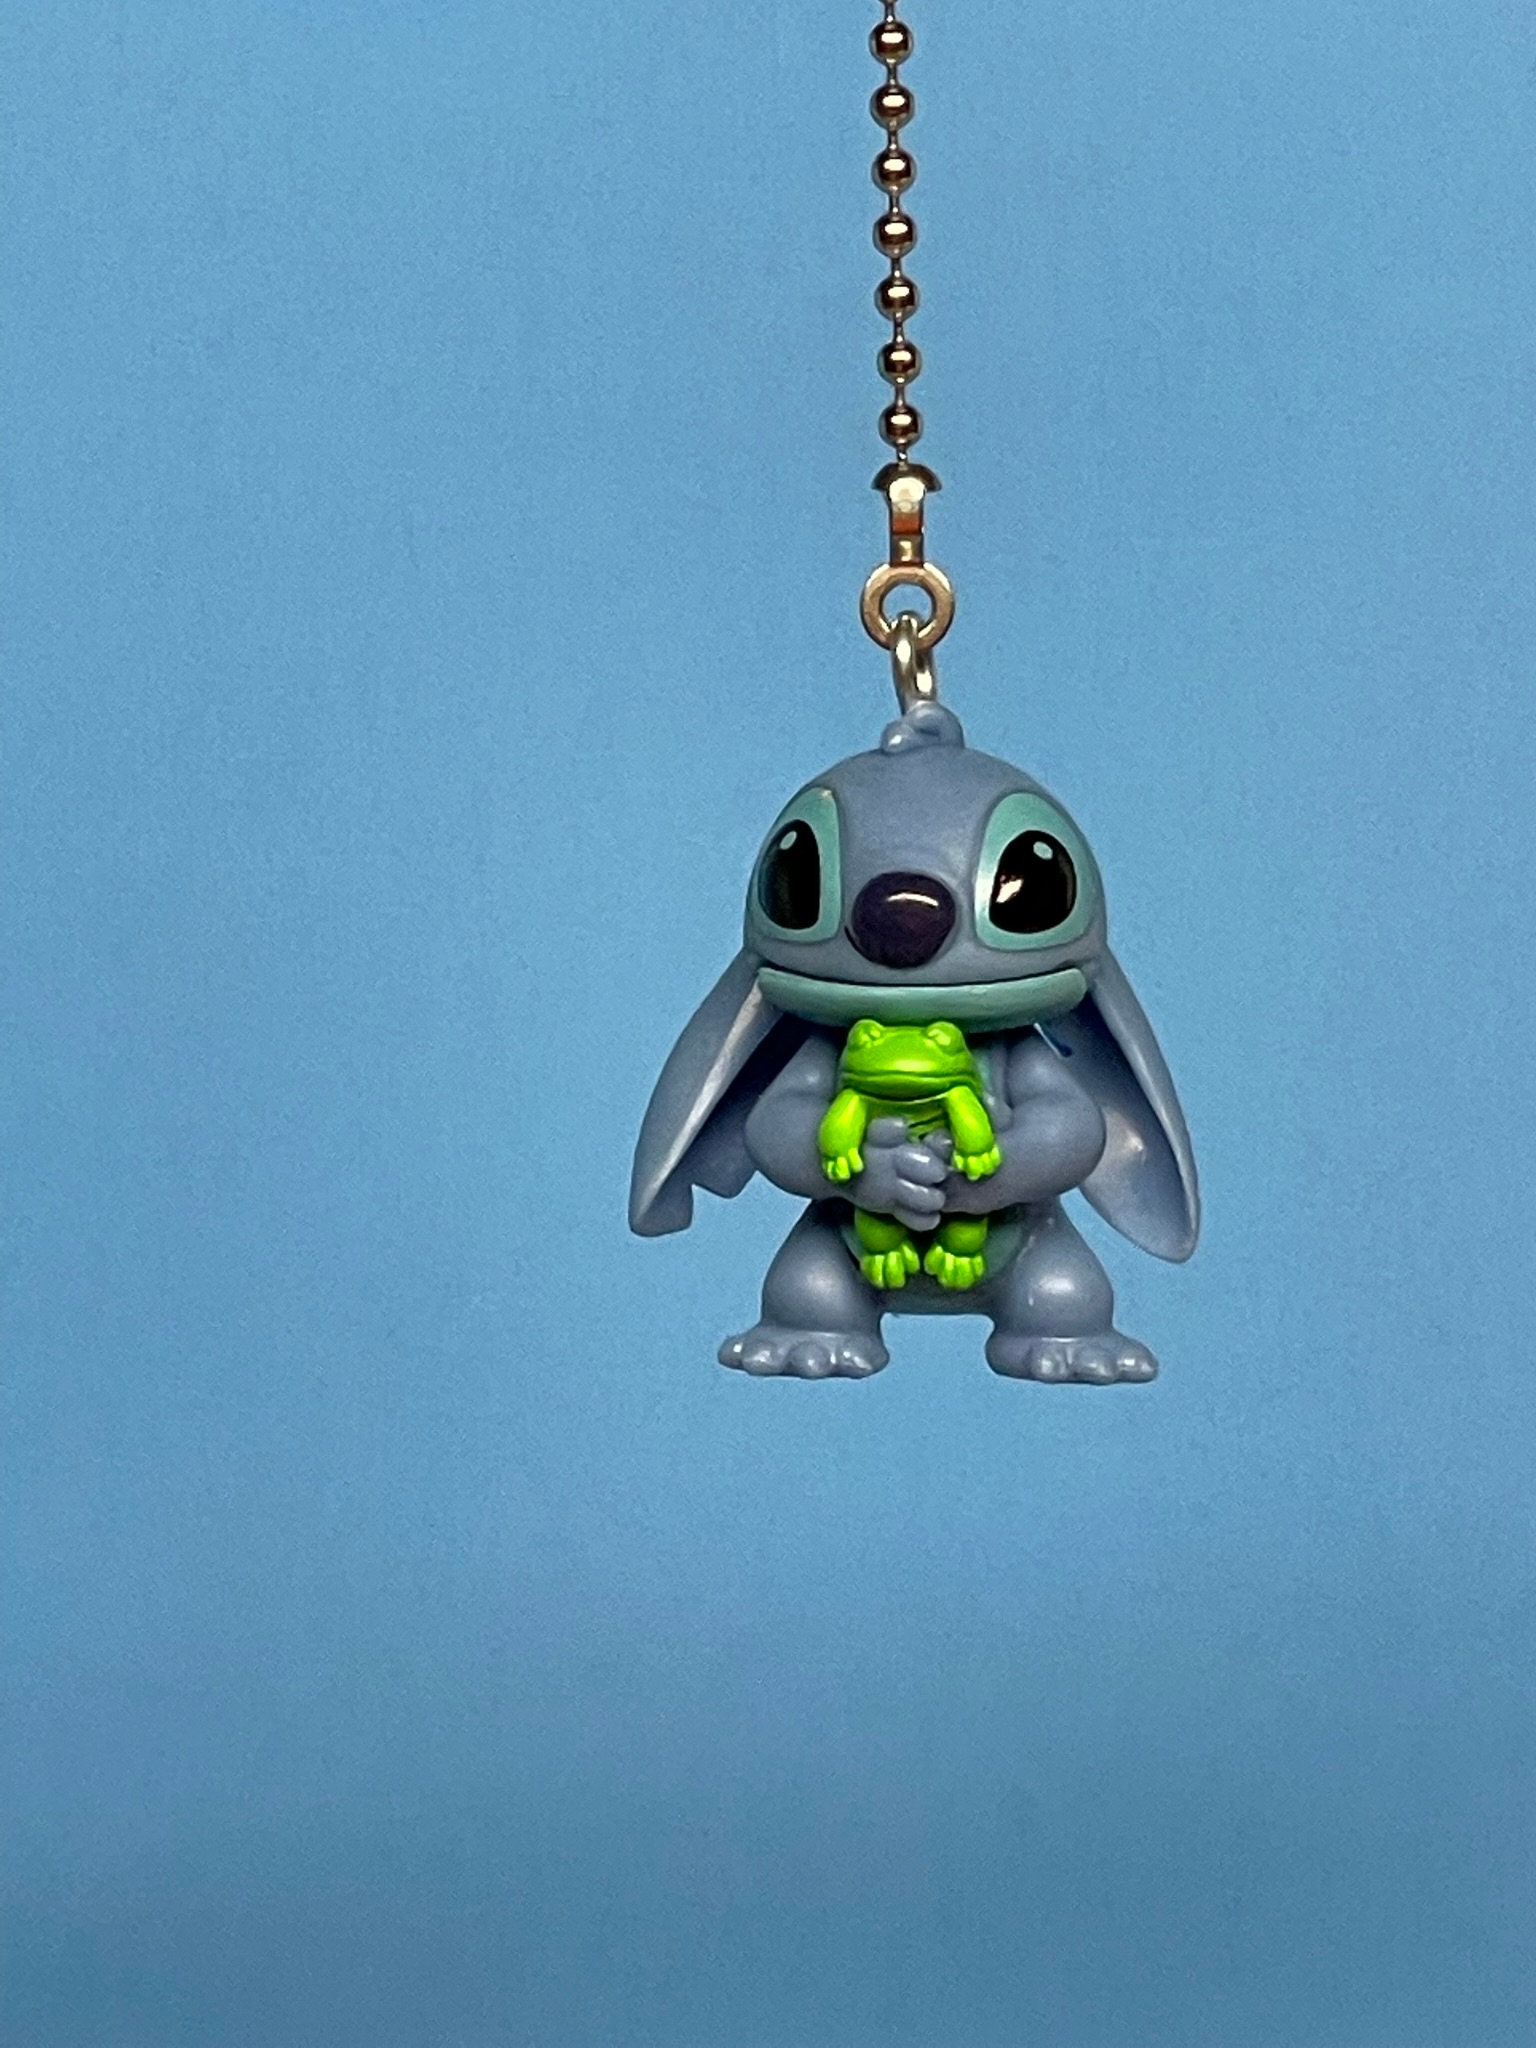 Stitch From Lilo & Stitch Ceiling Fan/light Pull Chains -  Israel